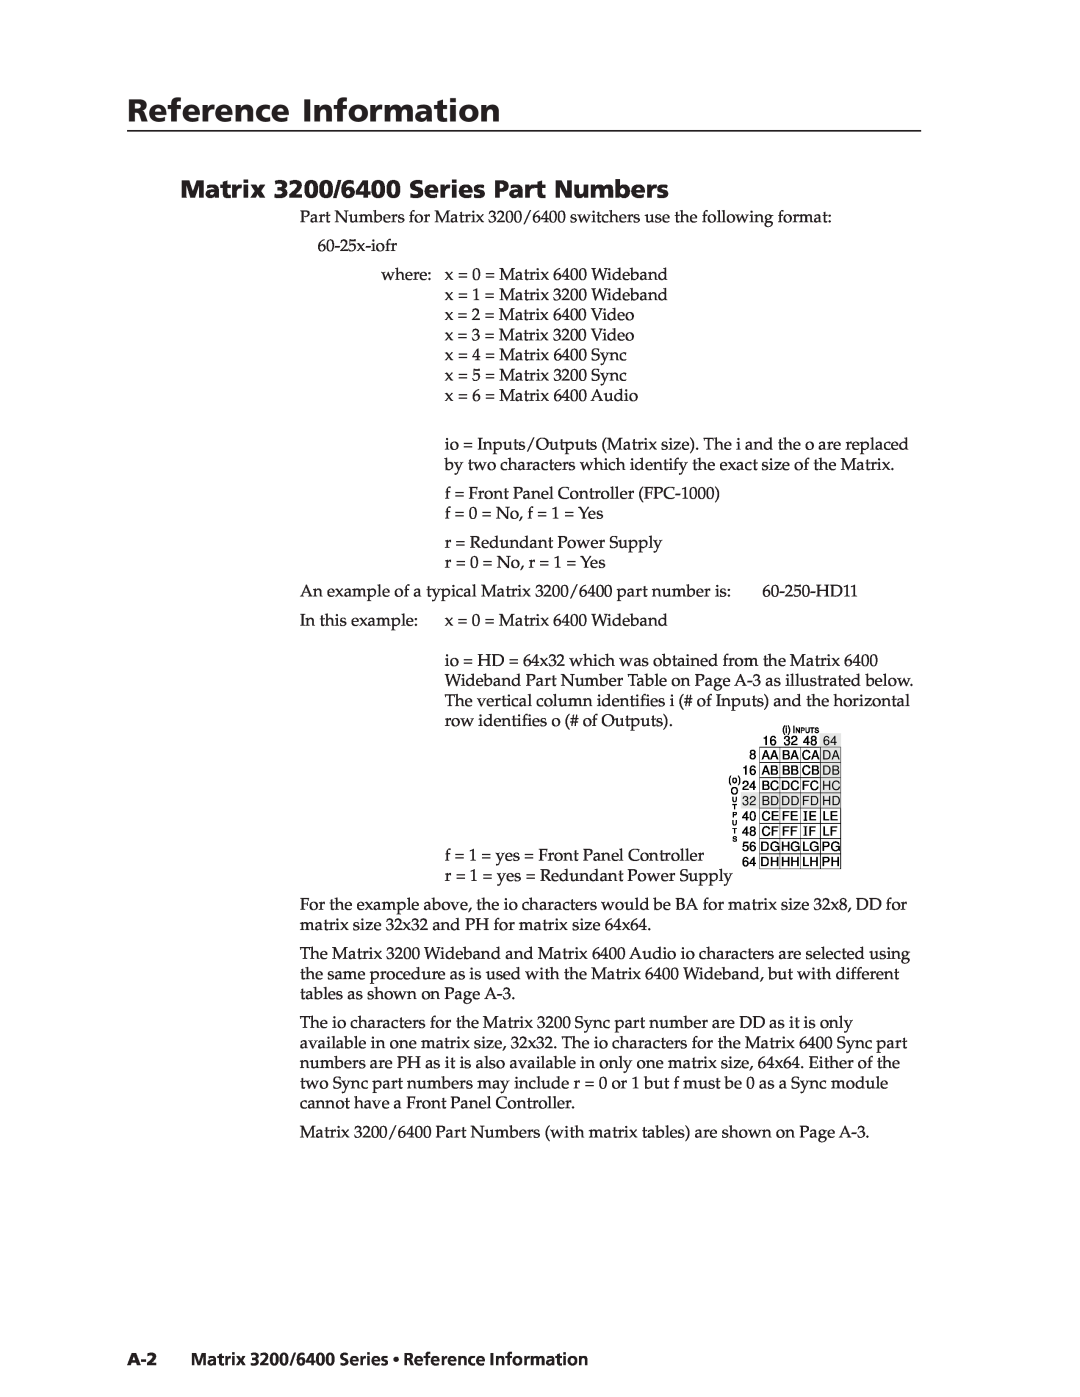 Extron electronic 3200s manual ReferenceInformation,c t’d, Matrix 3200/6400 Series Part Numbers 